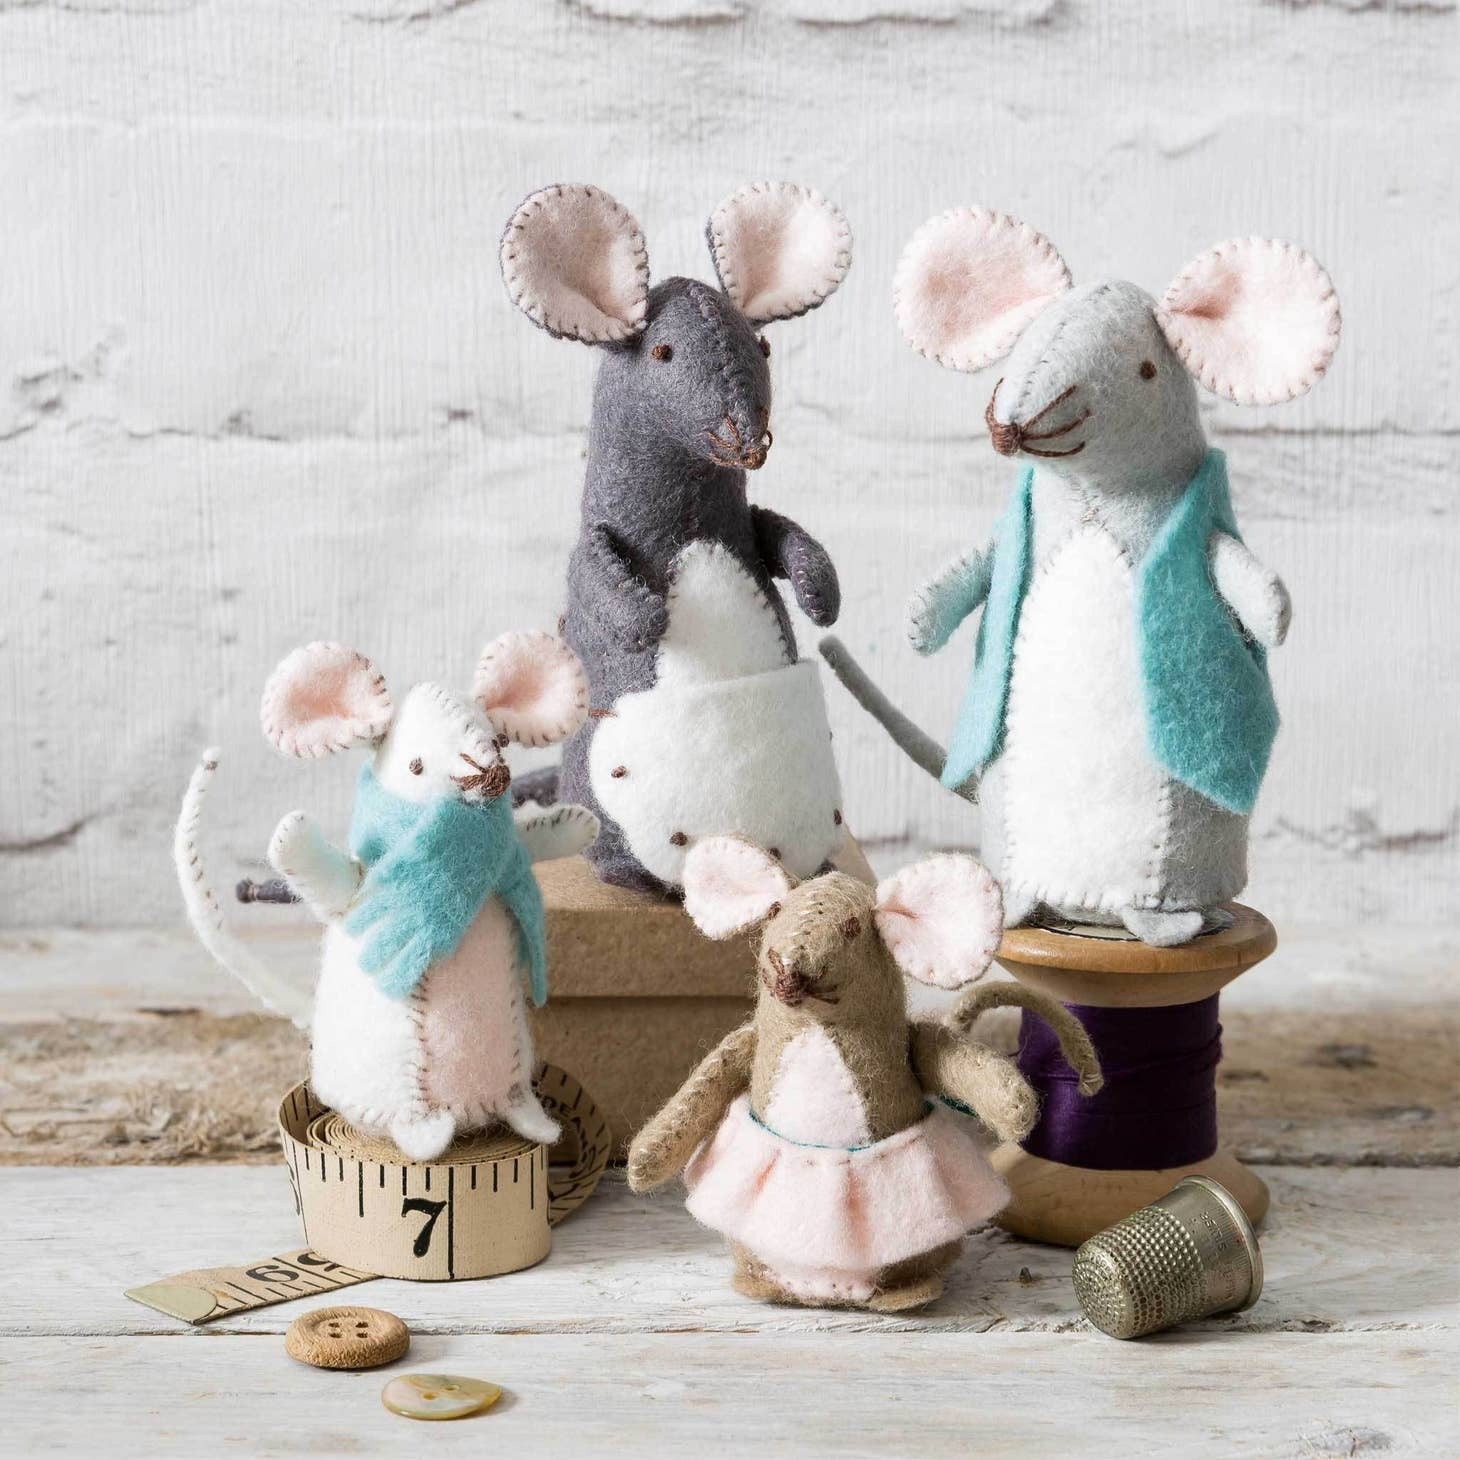 Handcrafted felt mouse family with two adult mice and two baby mice, each adorned with unique clothing items, posed against a rustic white wooden background with sewing accessories.